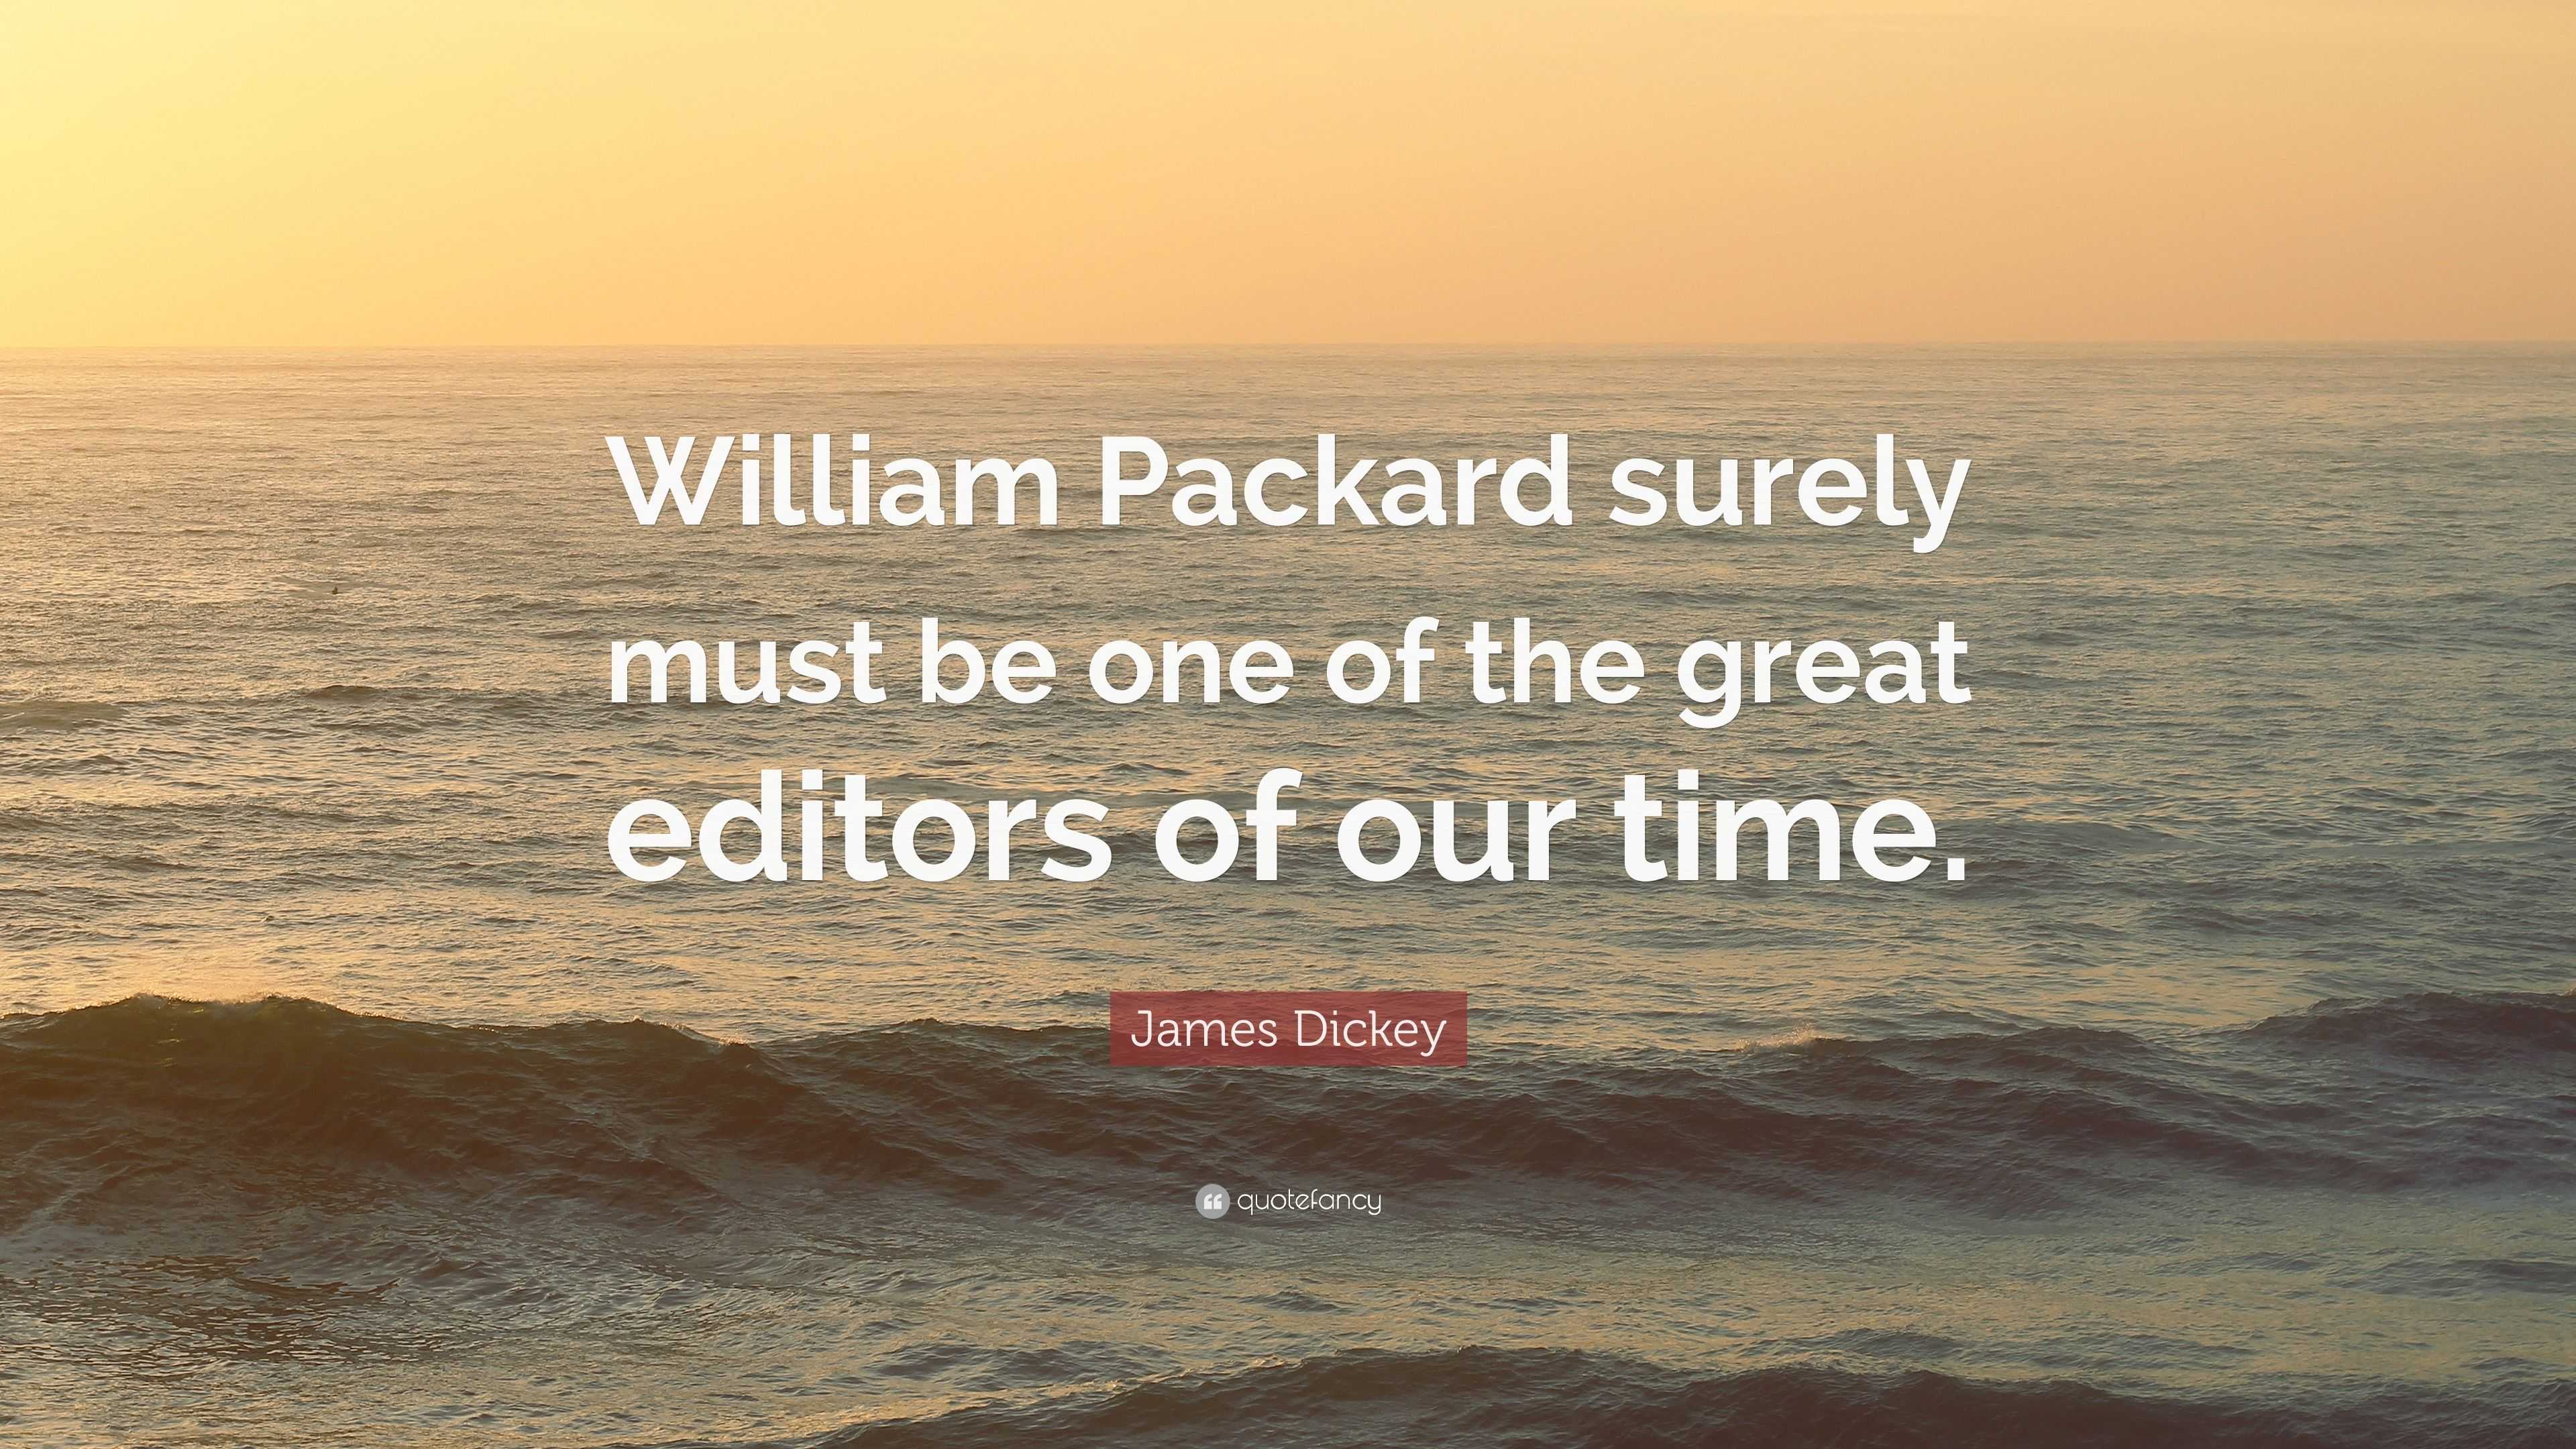 James Dickey Quote: “William Packard surely must be one of the great ...